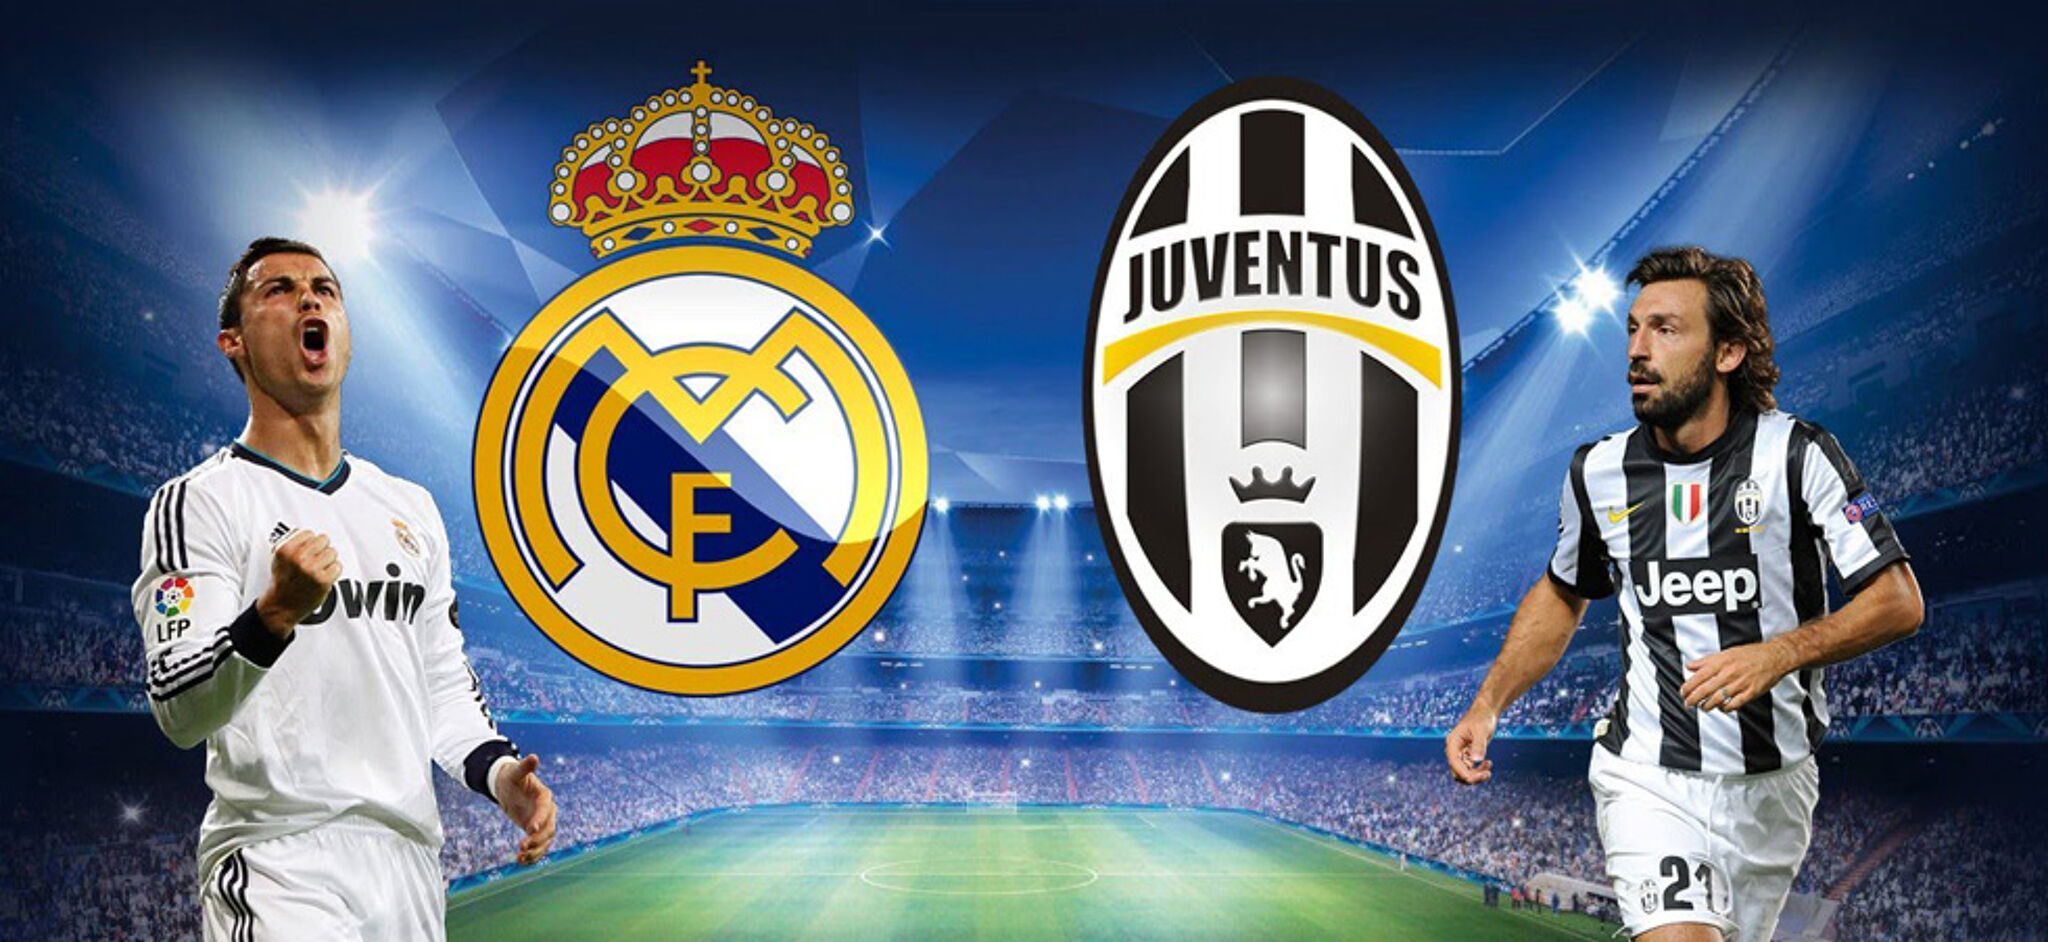 Watch Live stream Champions League final for free BT Sport outside UK